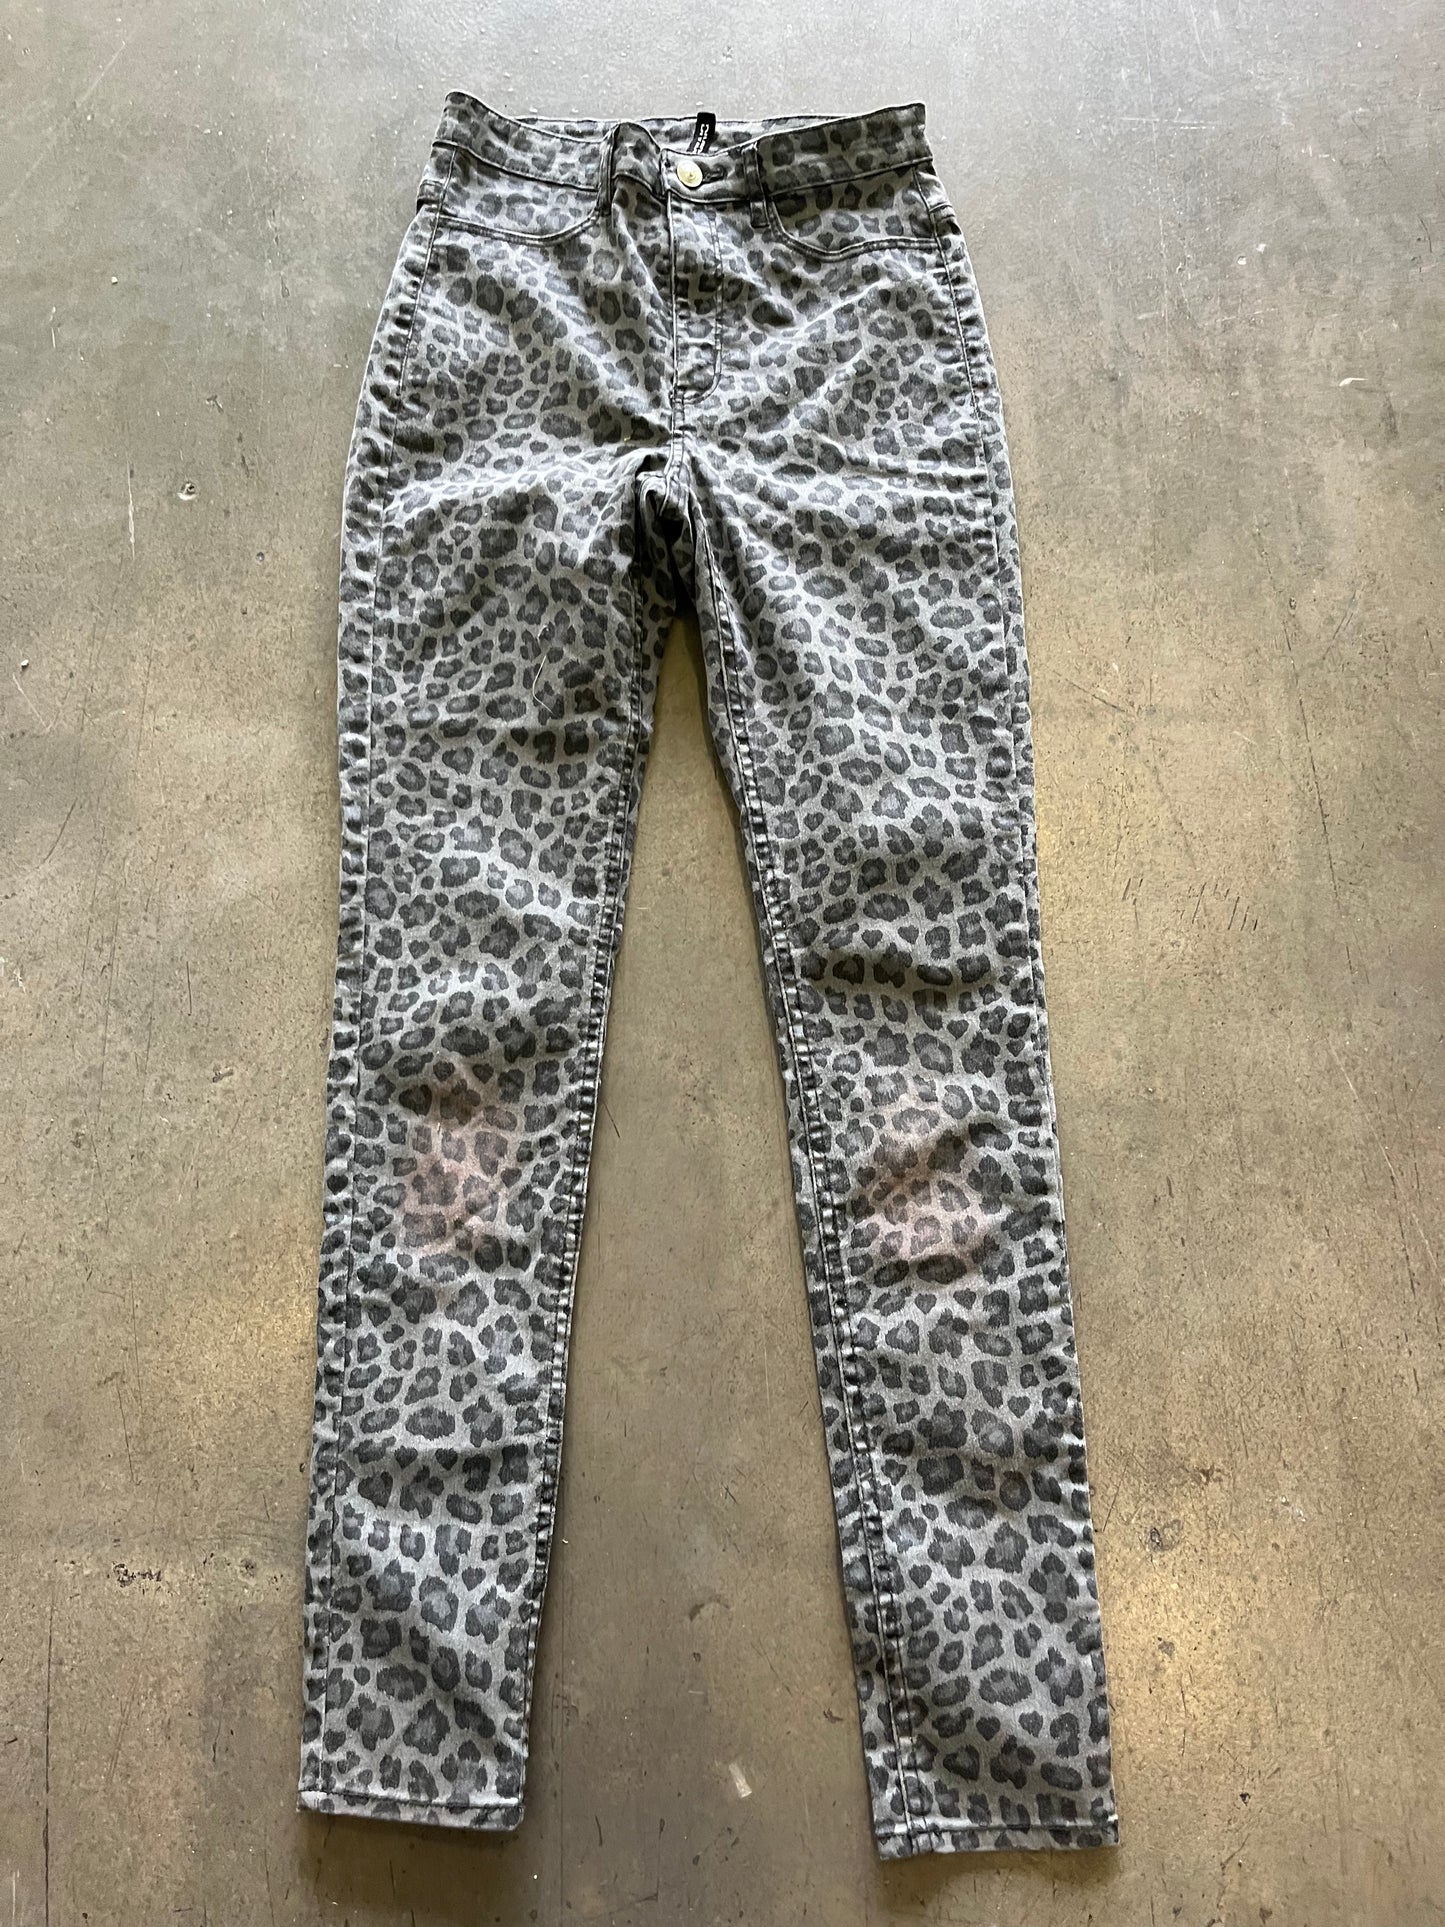 SONS OF ANARCHY: Wendy's Leopard Print Pants (6)